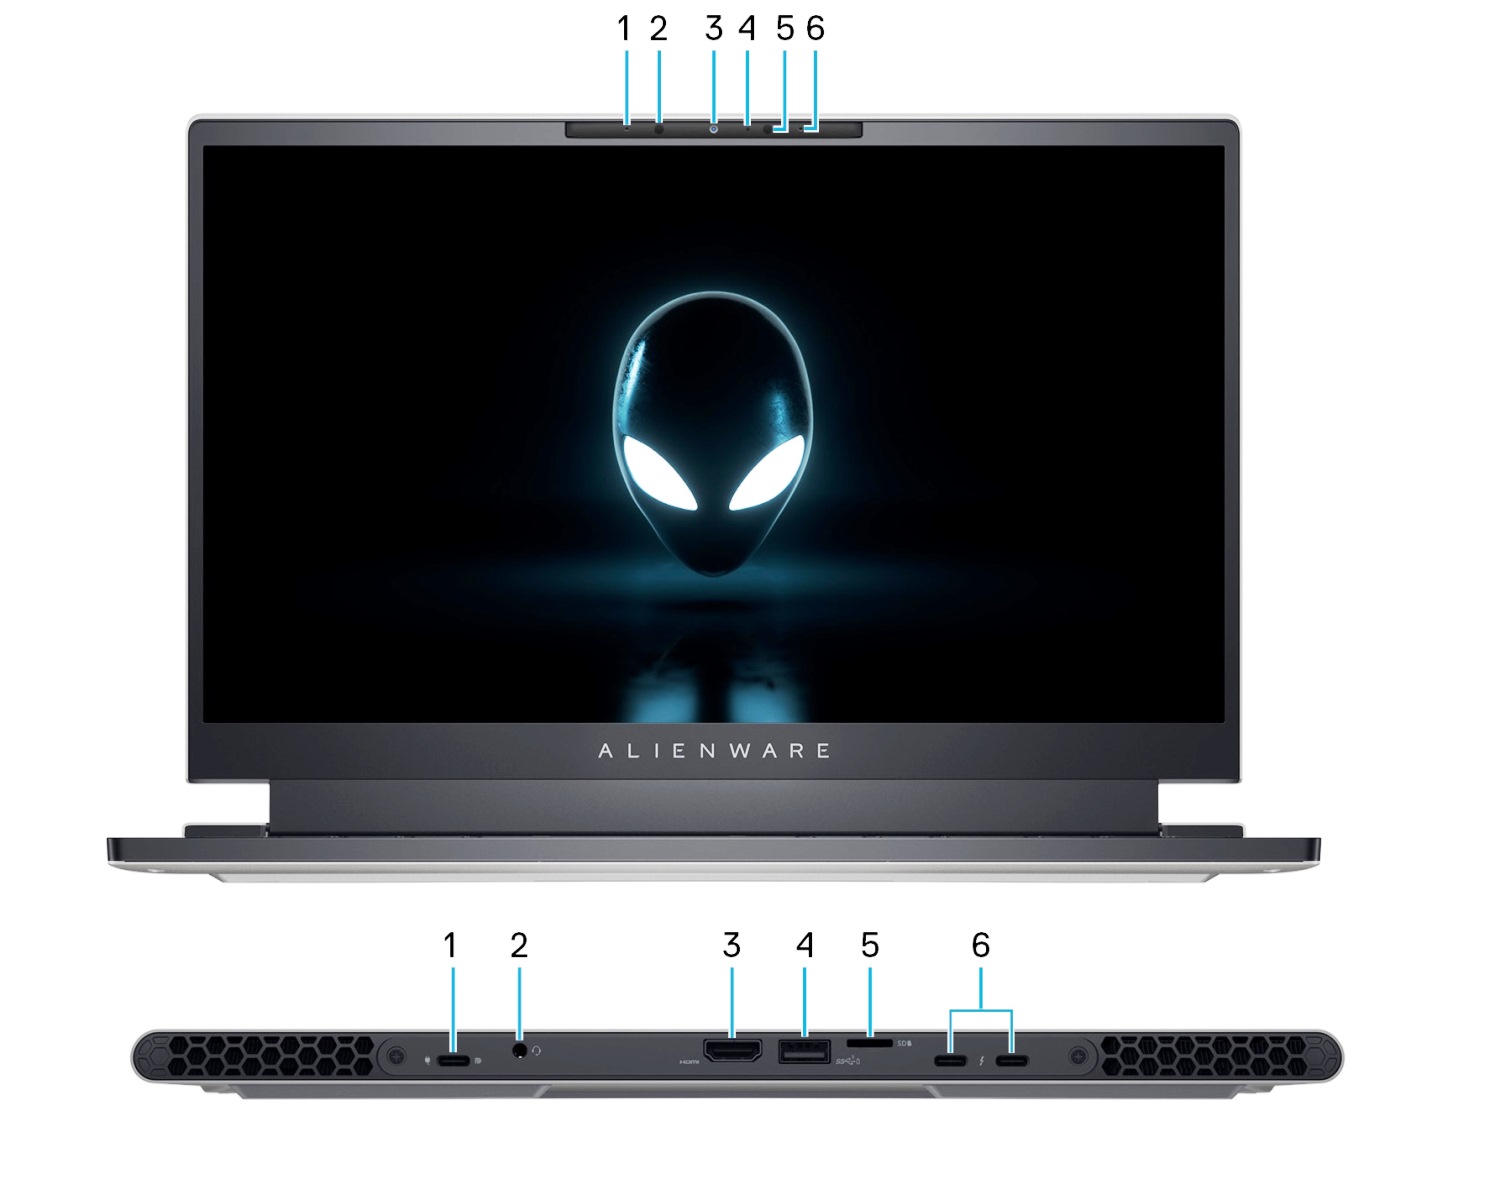 Dell Alienware x14 R1 Gaming Laptop - Front and Back View